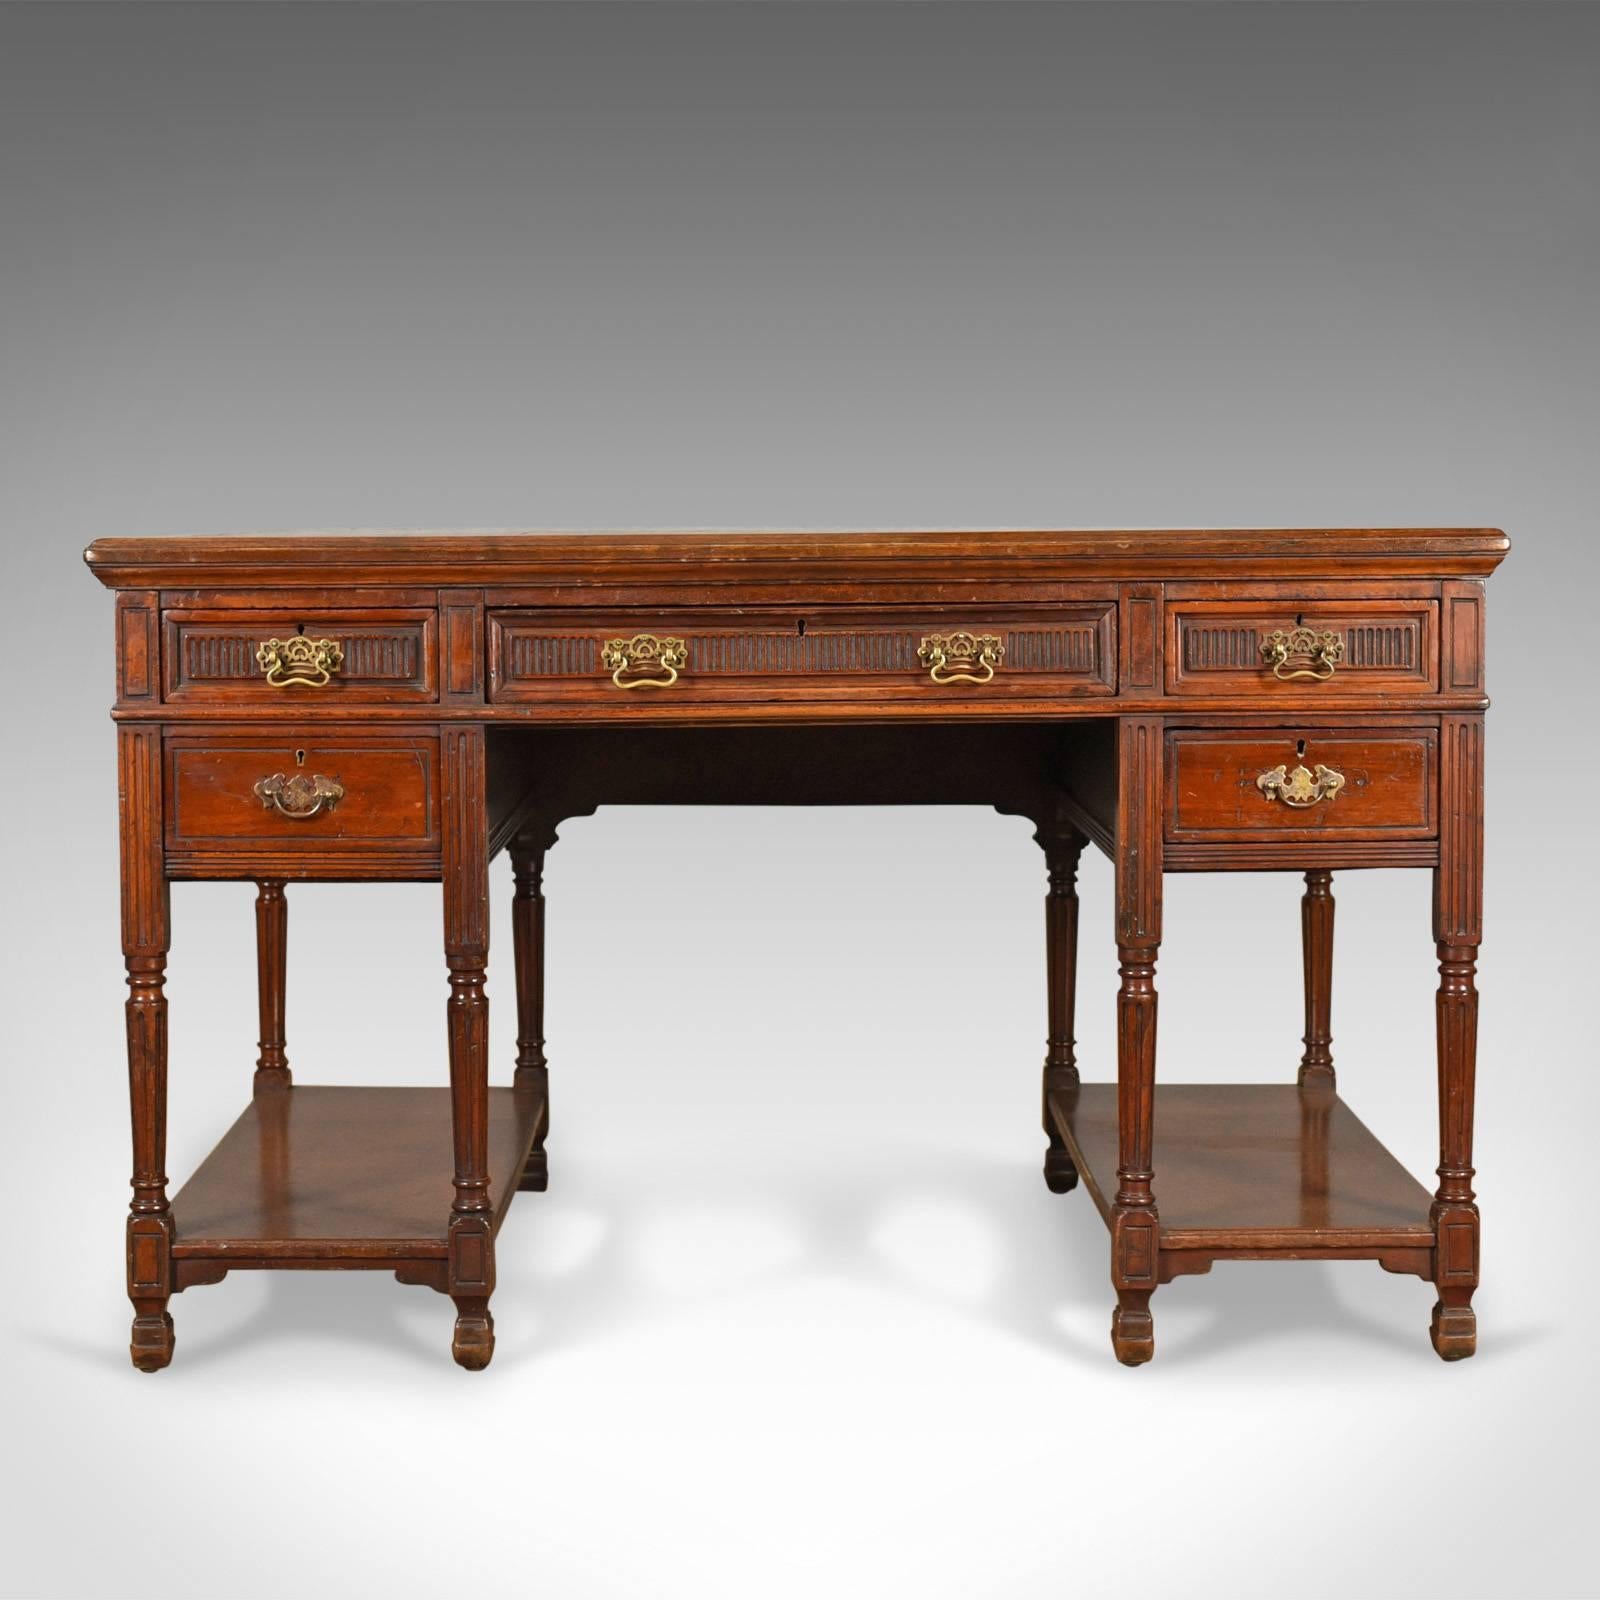 This is an antique open pedestal desk, an English, walnut writing table by W. Walker and Sons, London and dating to the late 19th century, circa 1870.

Attractive desk in select walnut displaying mellow tones
Made by the pre-eminent cabinet maker